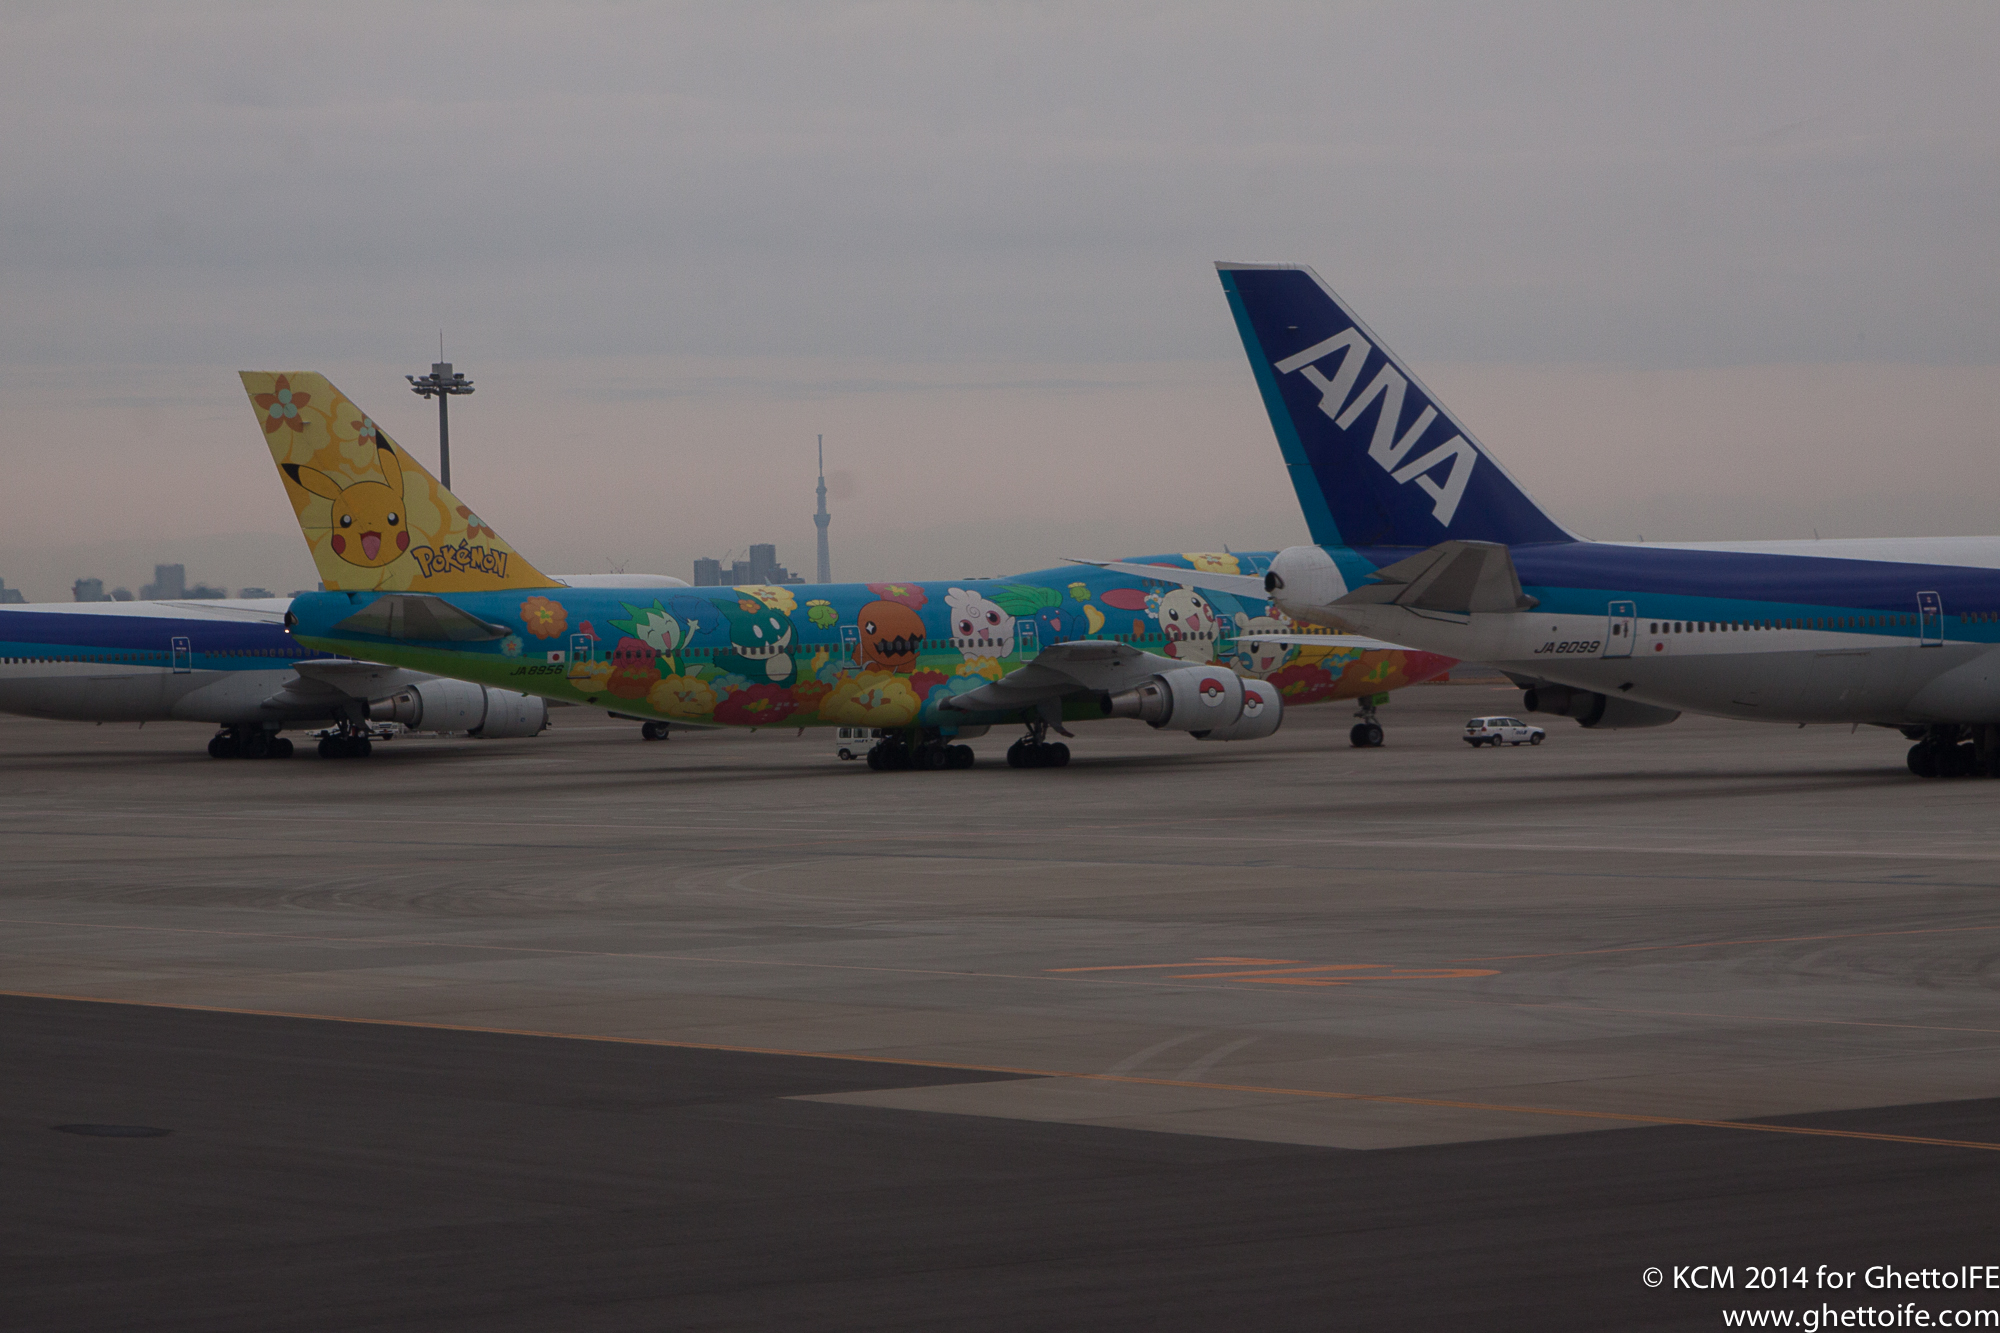 ANA Prepares to wave goodbye to the Boeing 747-400 - Economy Class & Beyond